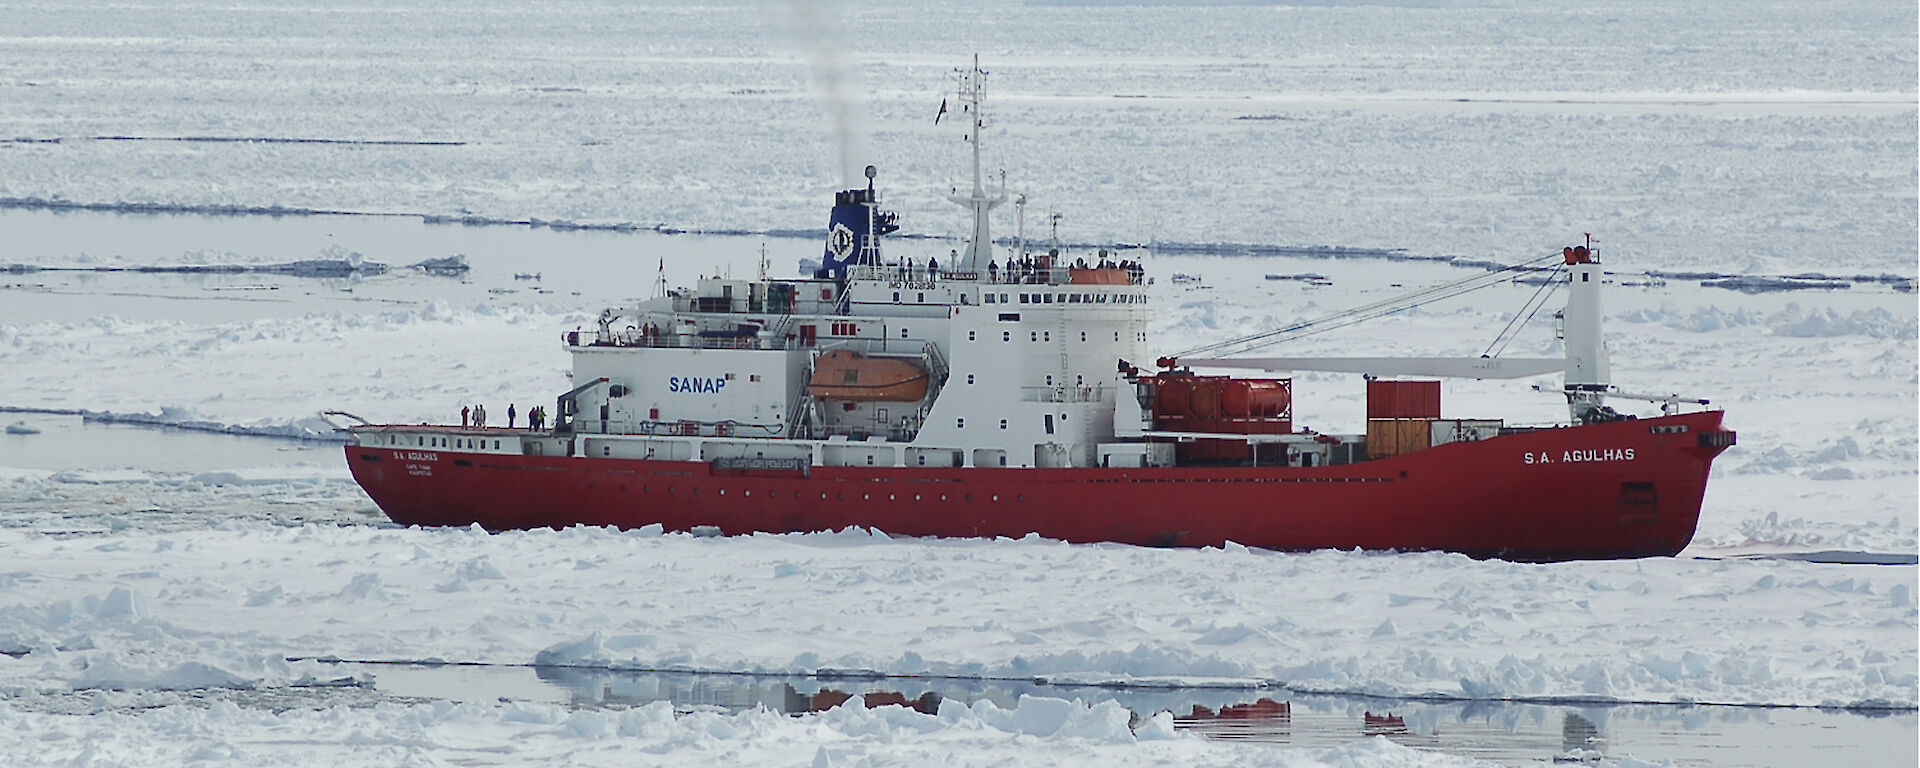 The South African Antarctic resupply vessel S.A. Agulhas.